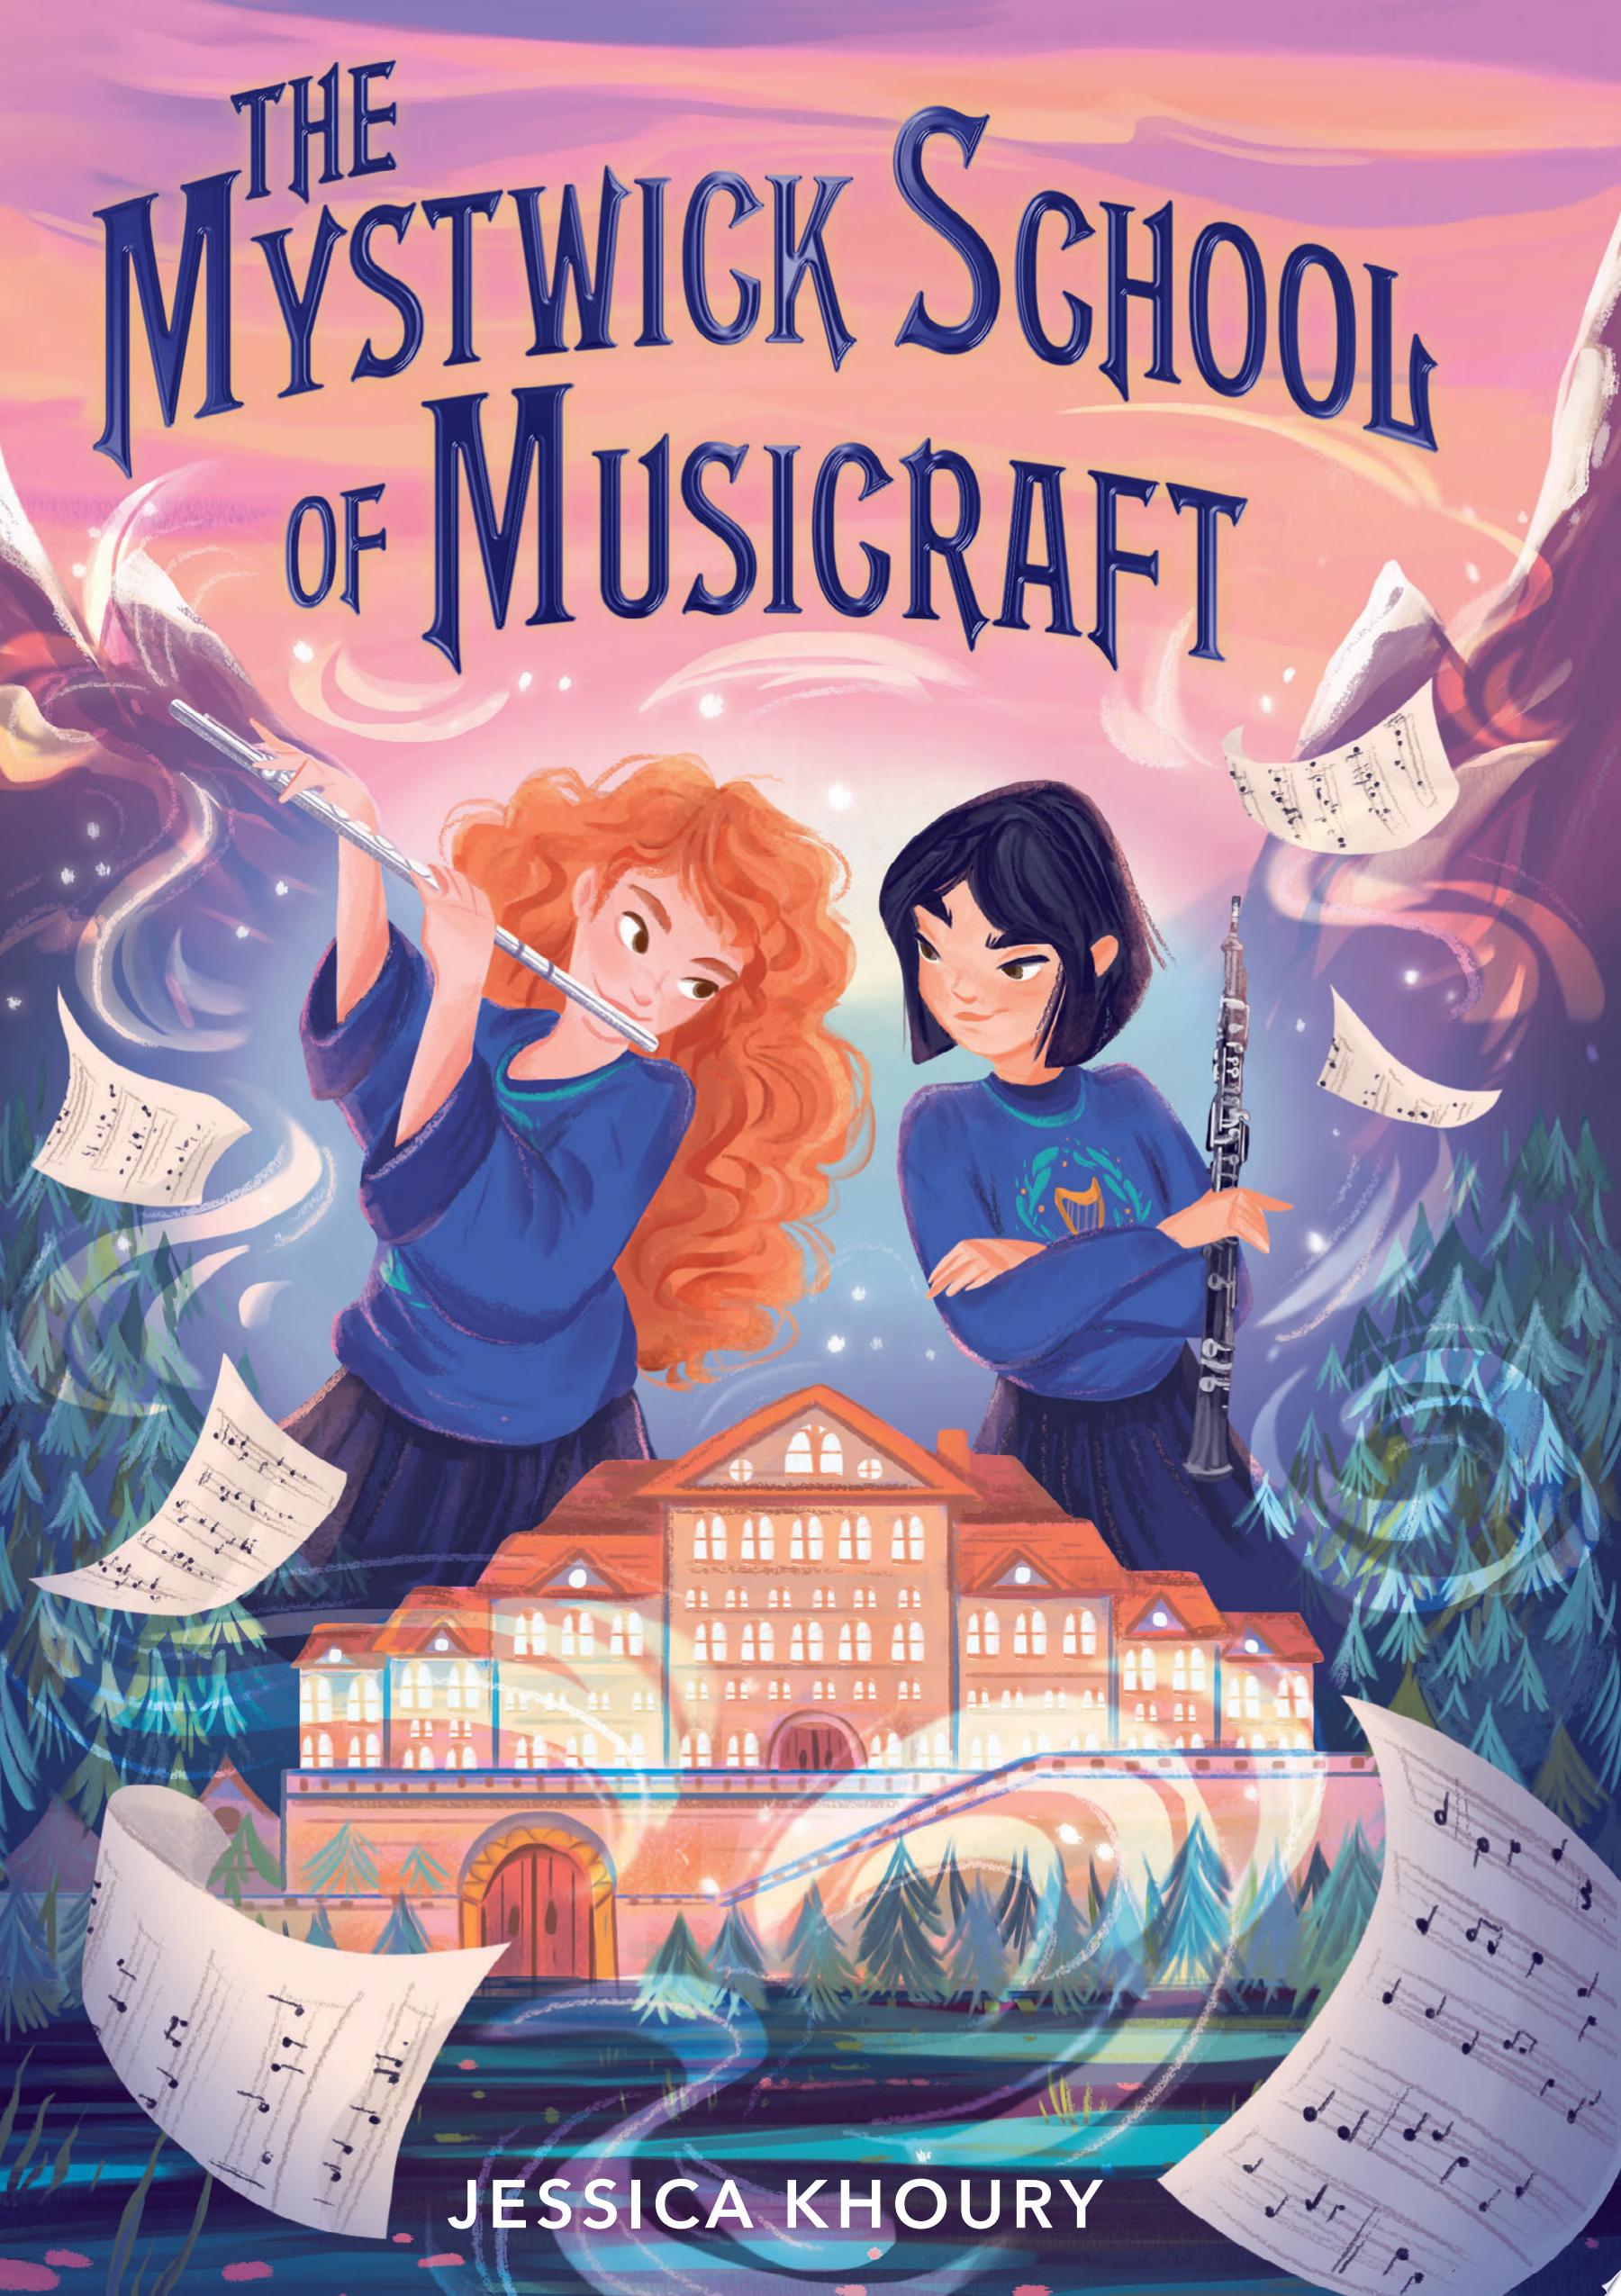 Image for "The Mystwick School of Musicraft"